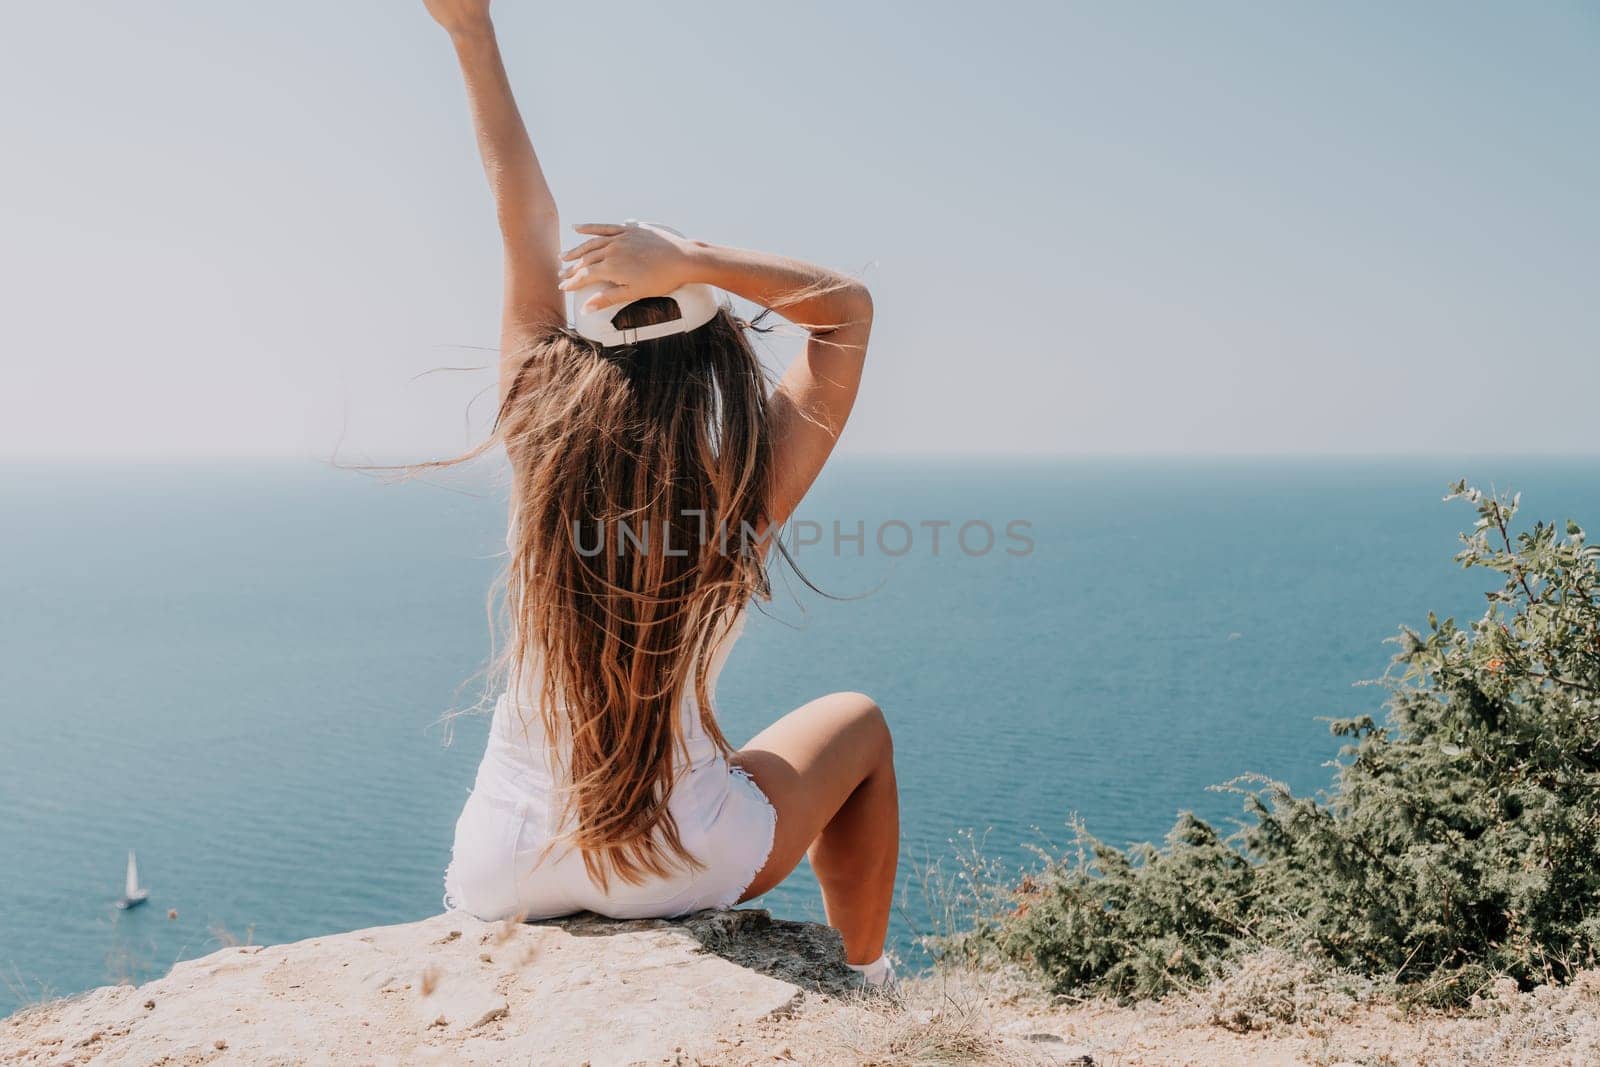 Woman summer travel sea. Happy tourist enjoy taking picture outdoors for memories. Woman traveler posing over sea bay surrounded by volcanic mountains, sharing travel adventure journey by panophotograph